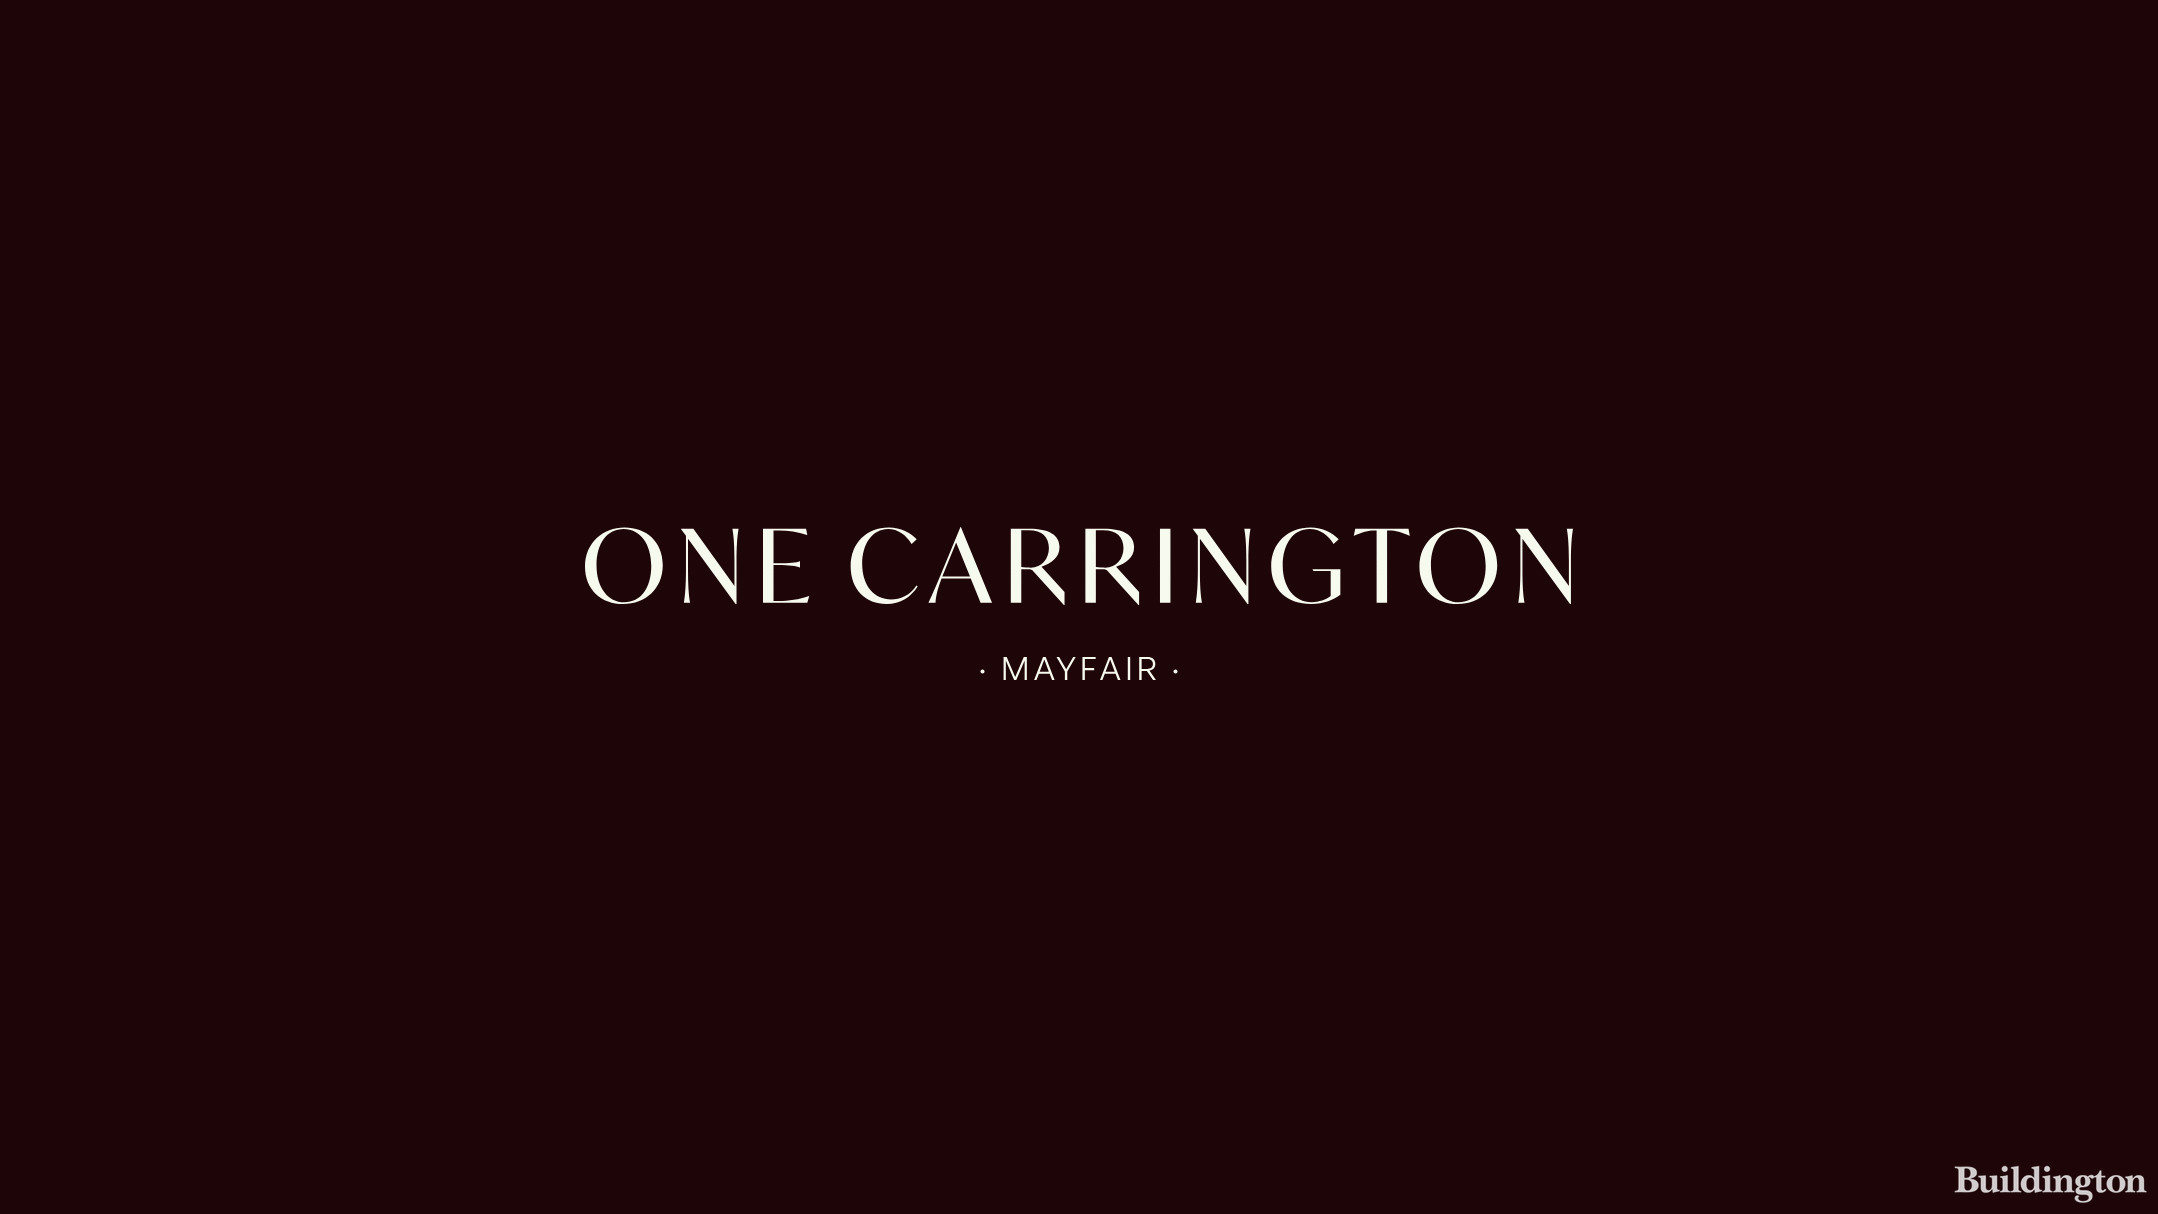 One Carrington logo cover forr new development by Reuben Brothers in Mayfair, London W1.